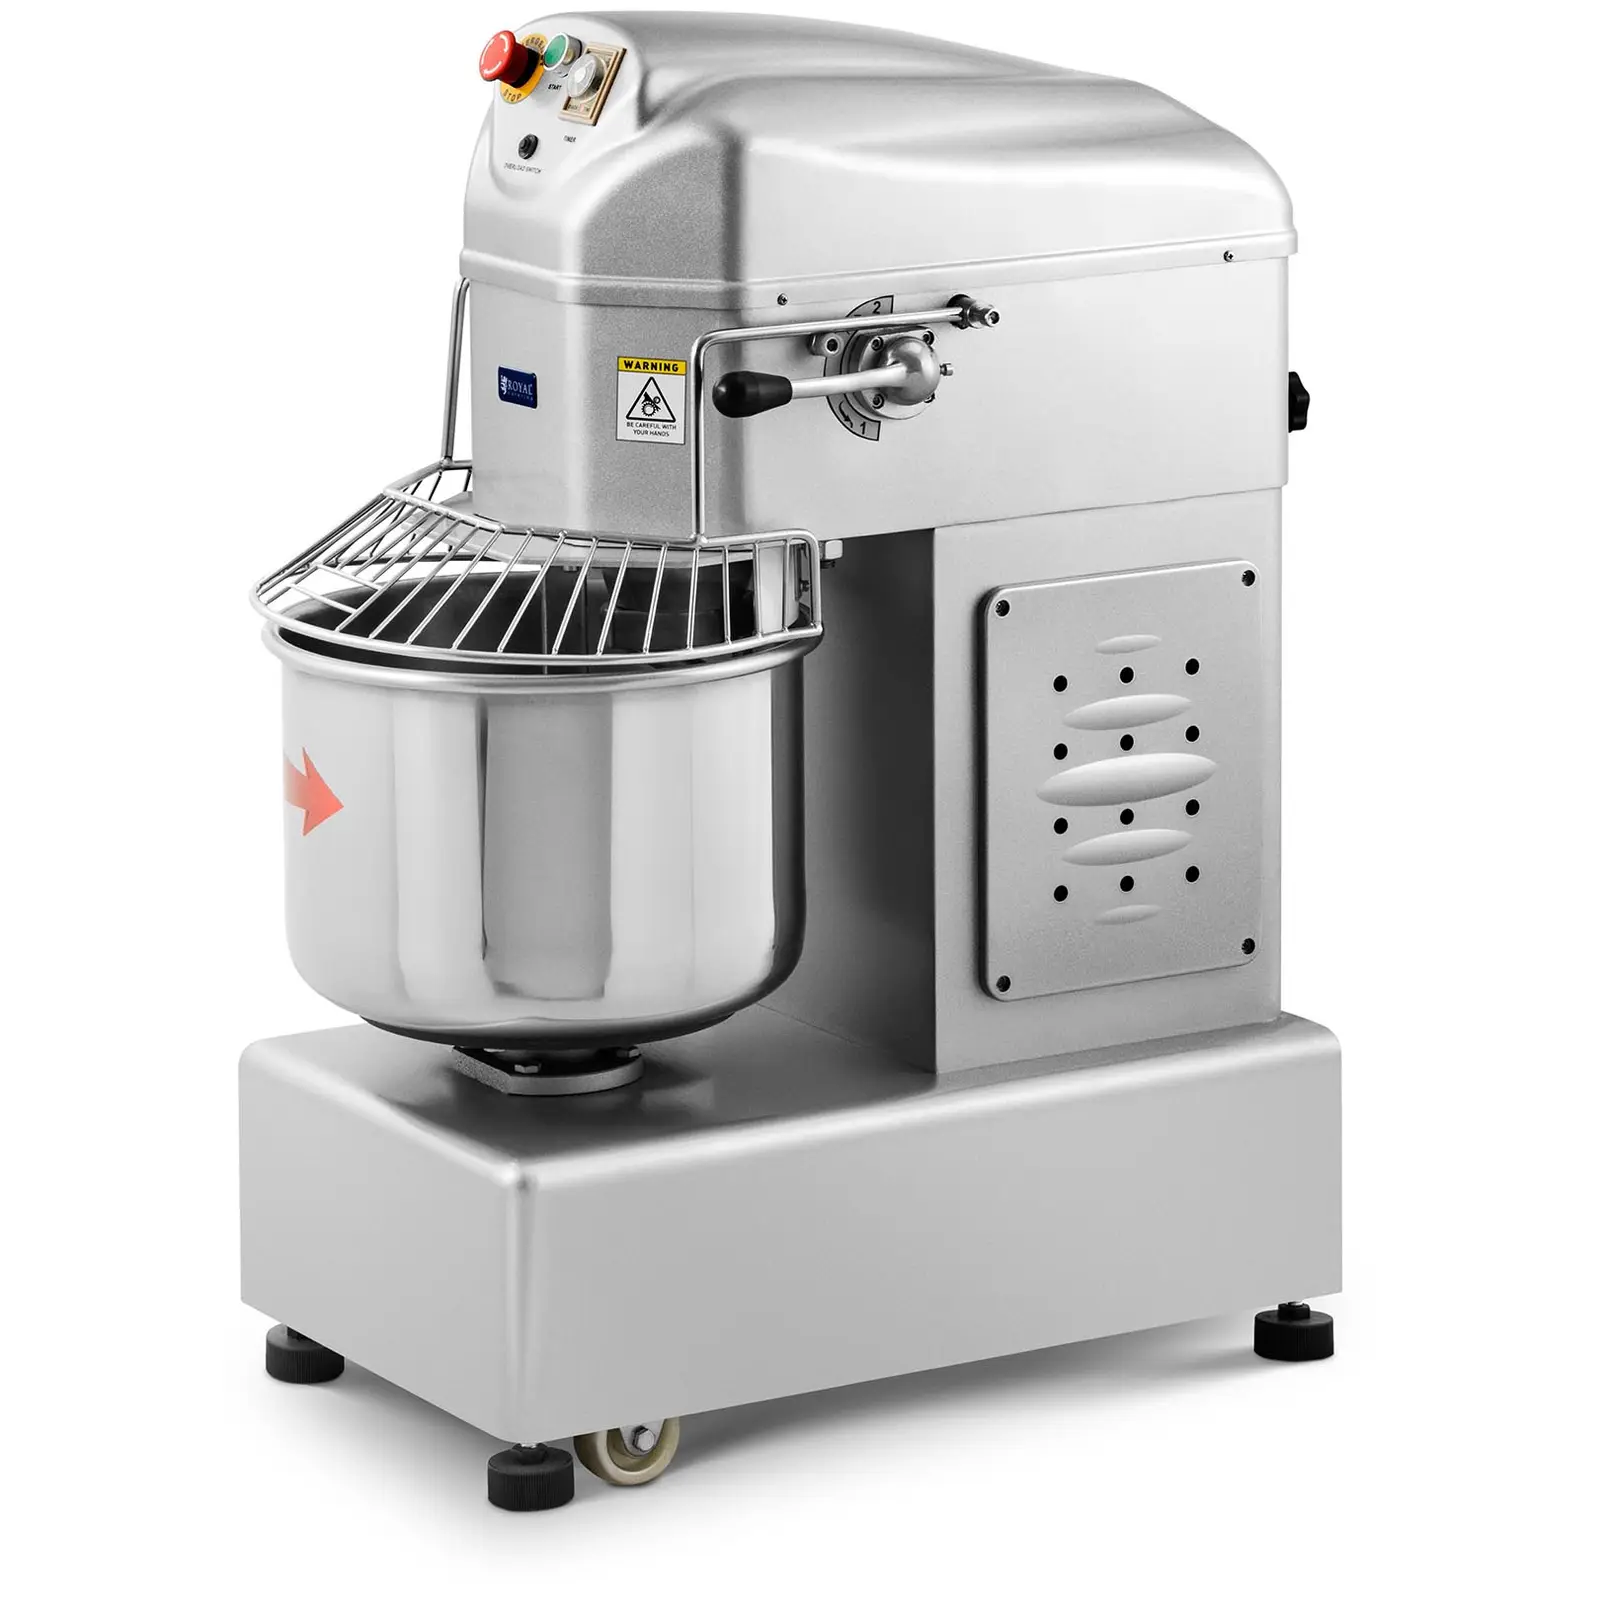 B-Ware Knetmaschine - 30 L - Royal Catering - 2100 W